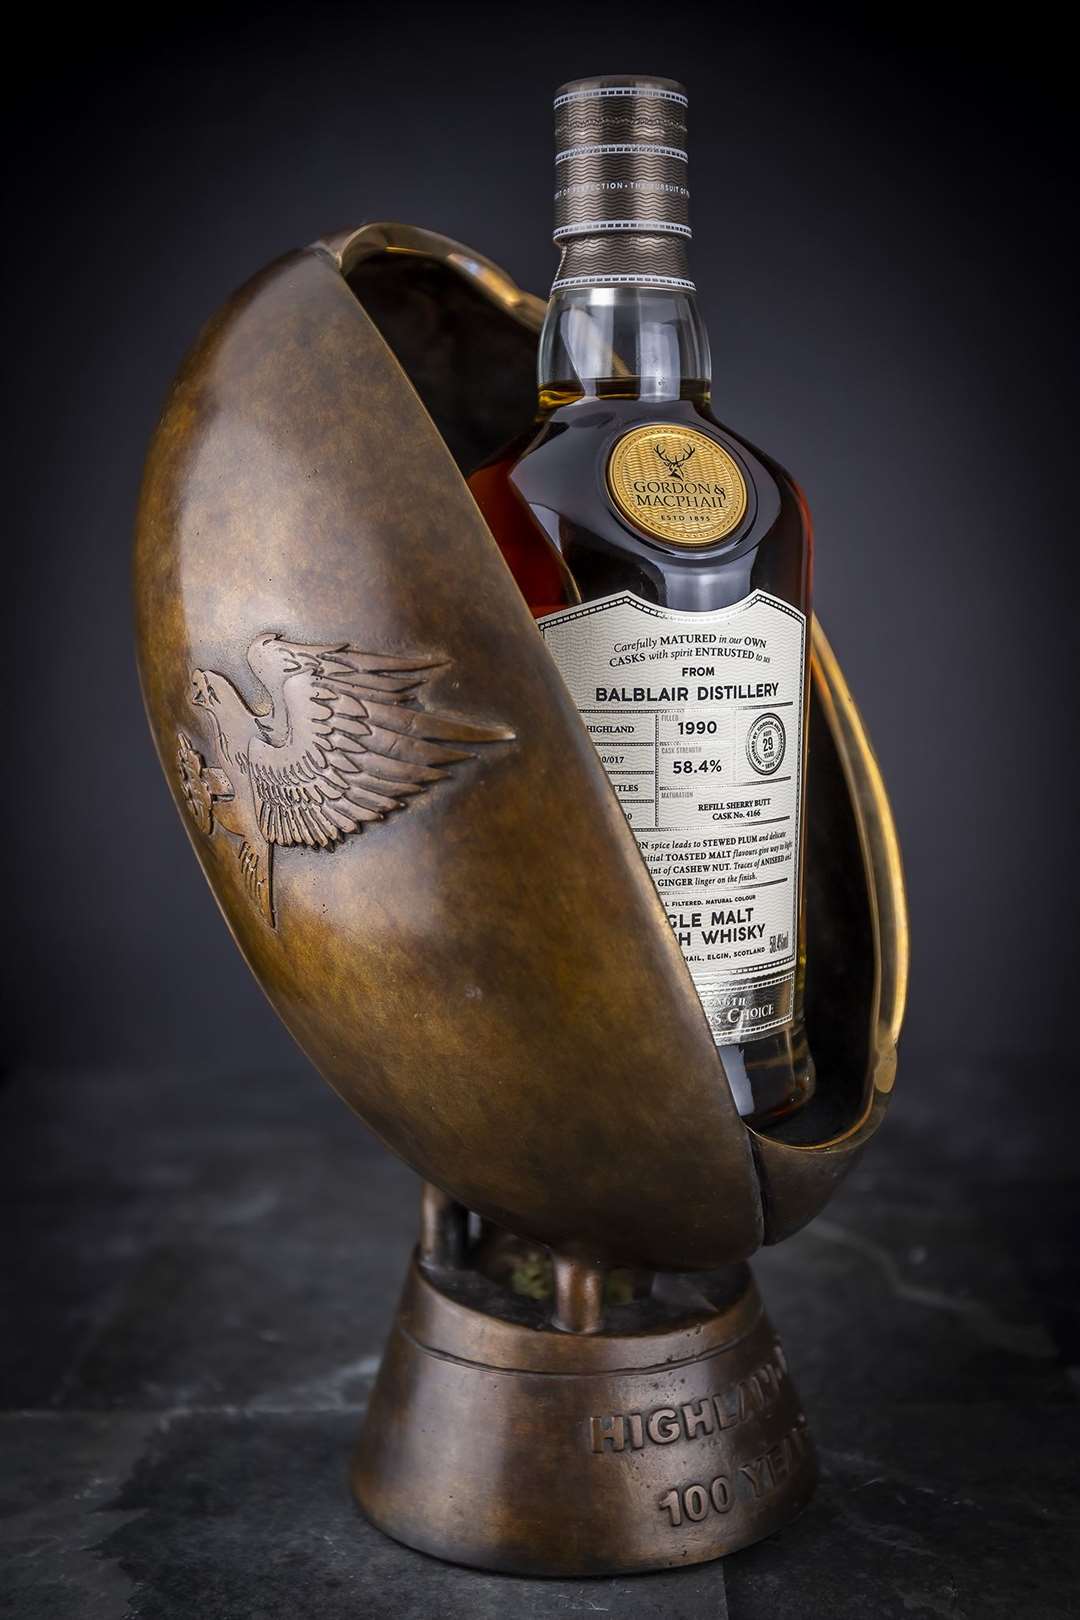 The bottle of 29-year-old Balblair whisky is housed in bronze plinth created exclusively for Highland Rugby Football Club by Black Isle Bronze.